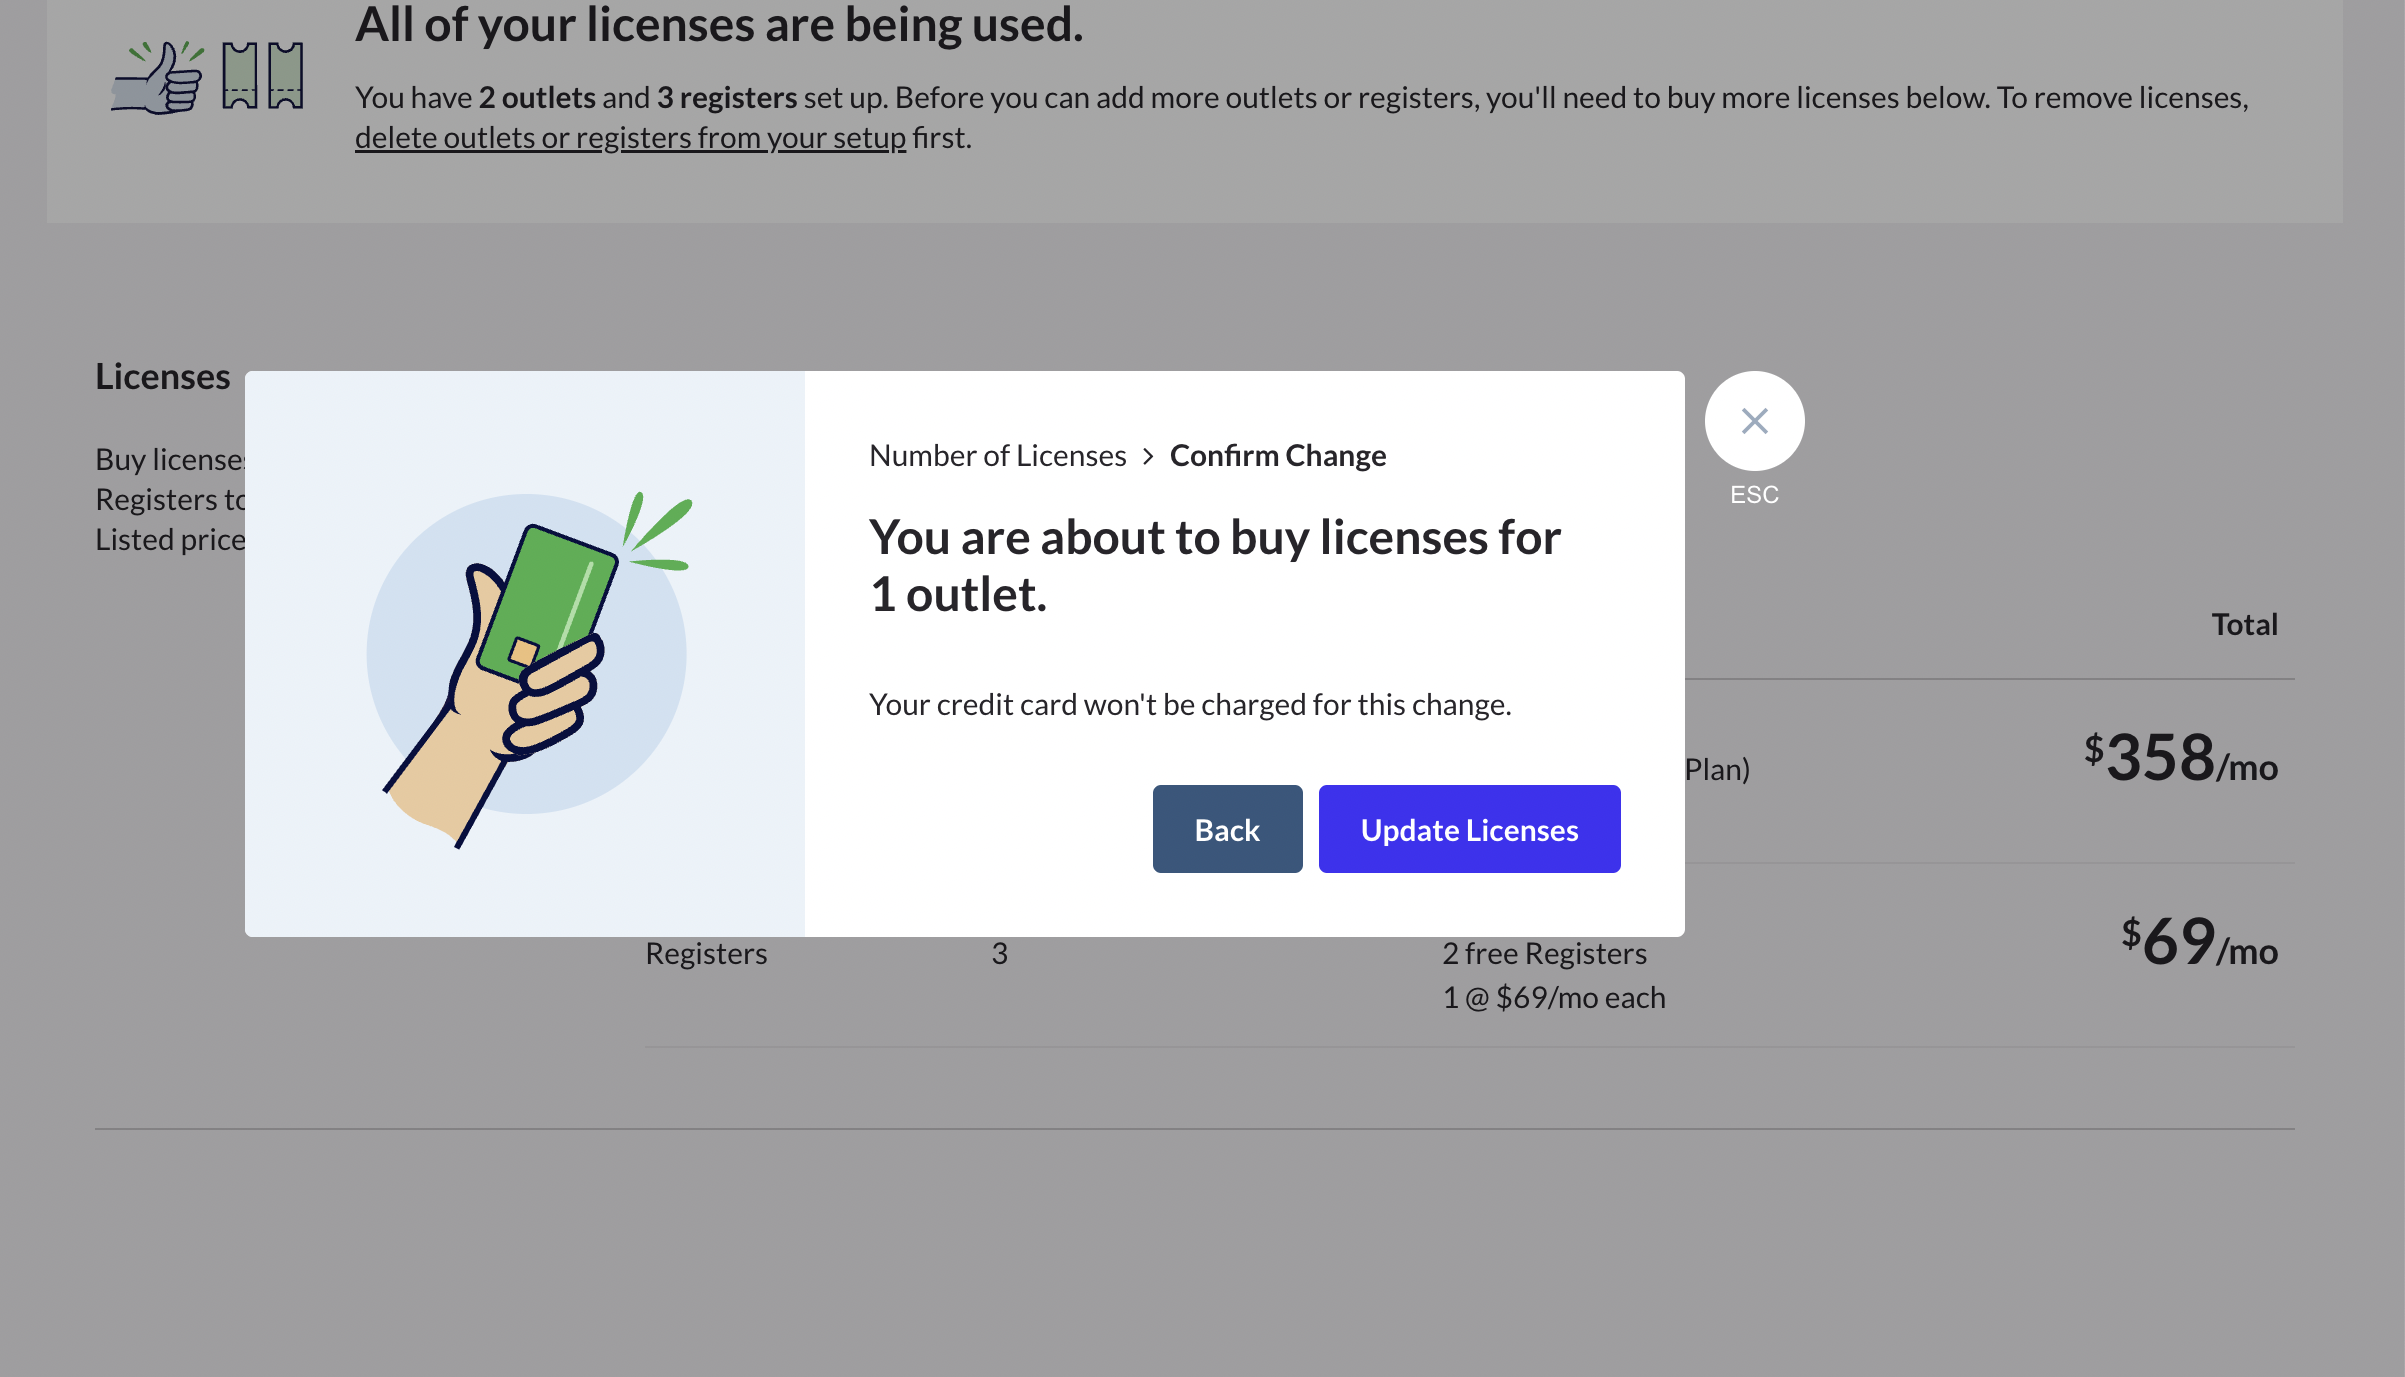 A pop up confirming You are about to buy licenses for 1 outlet with Back and Update Licenses buttons.